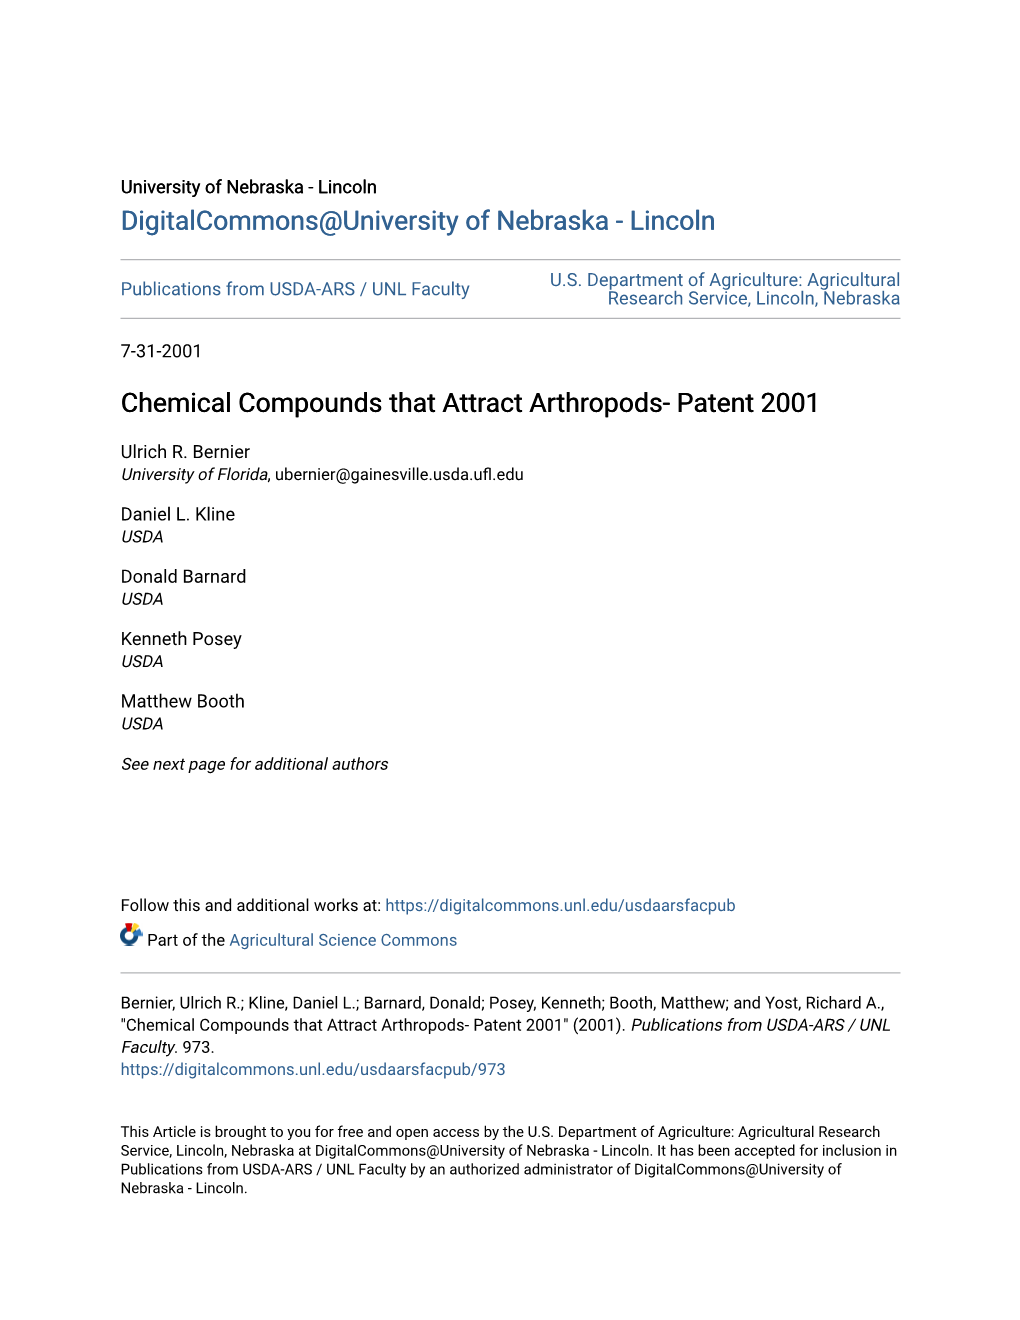 Chemical Compounds That Attract Arthropods- Patent 2001